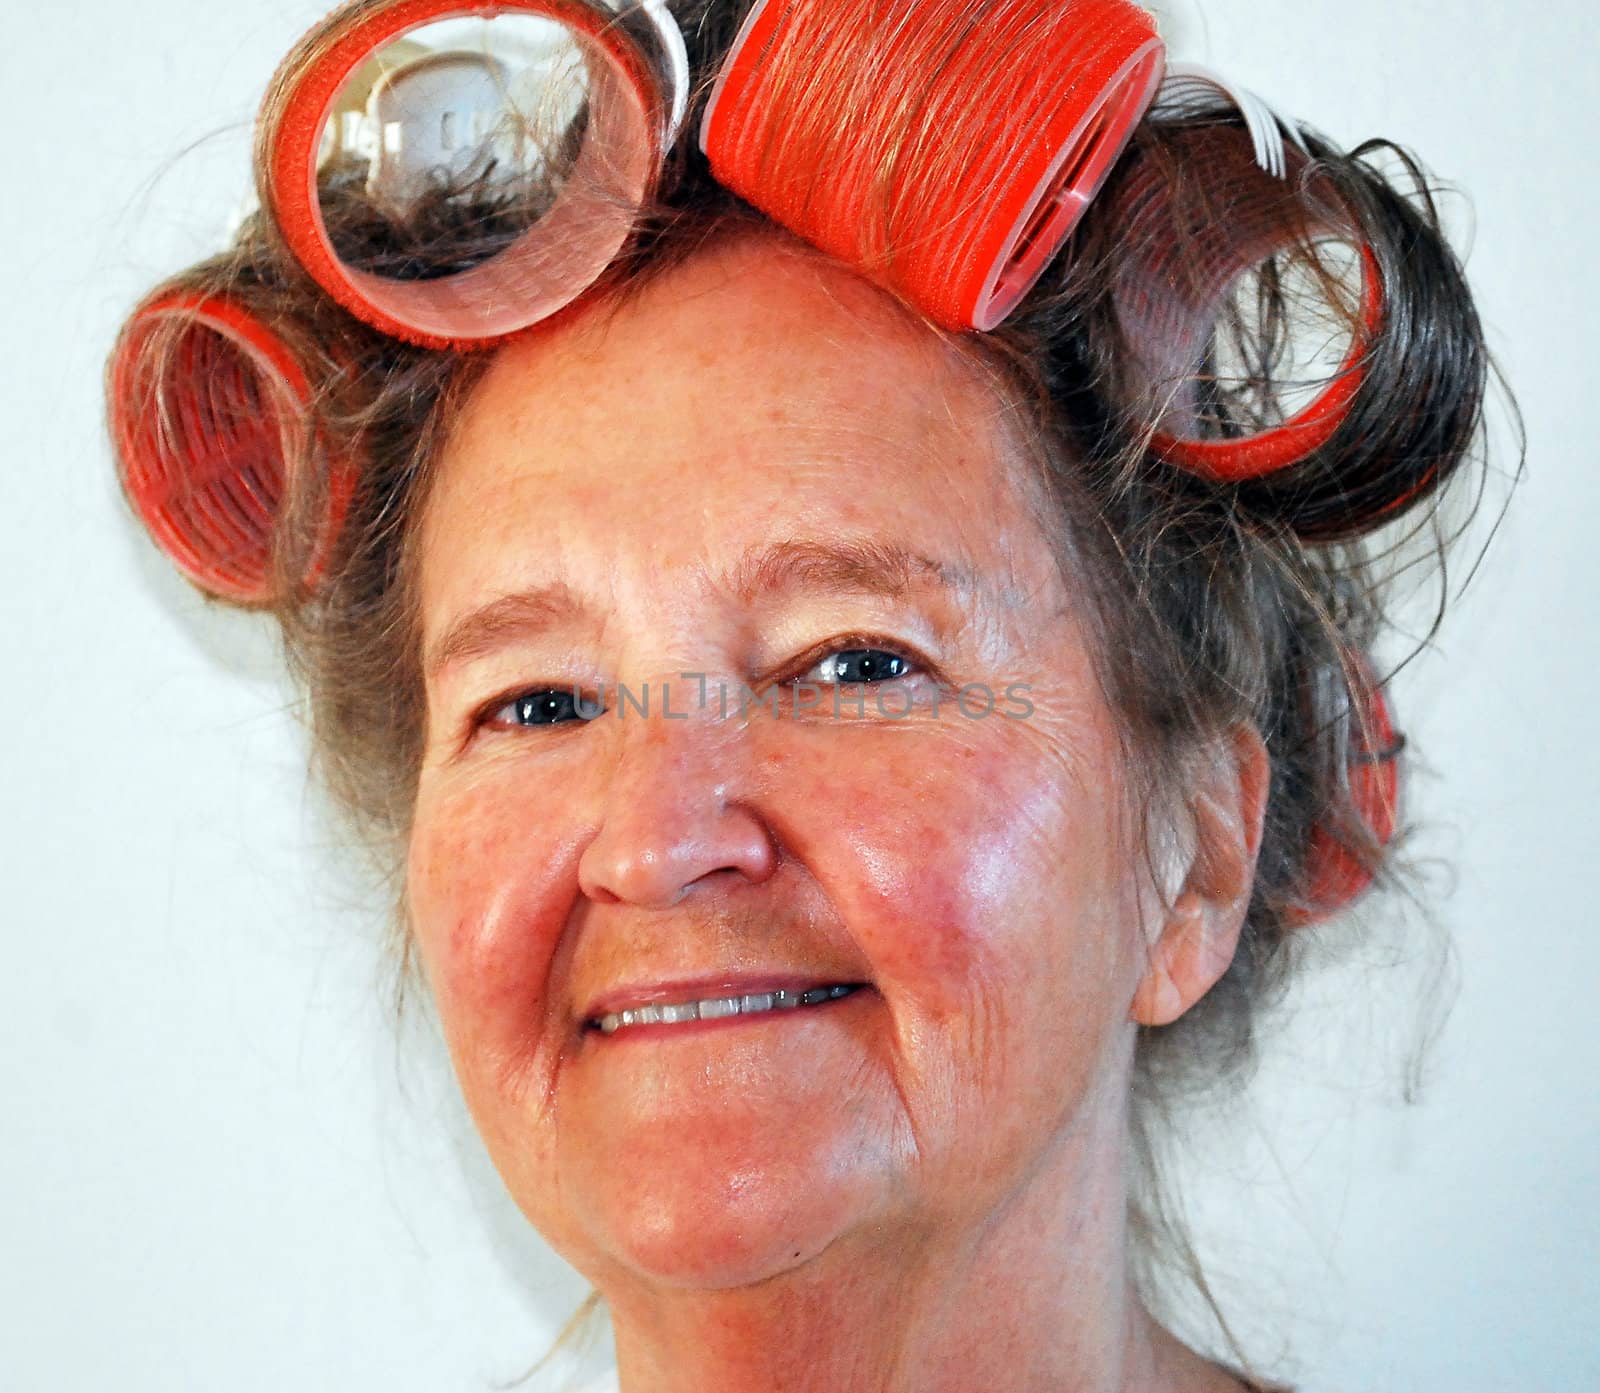 Mature female with big curlers in her hair.